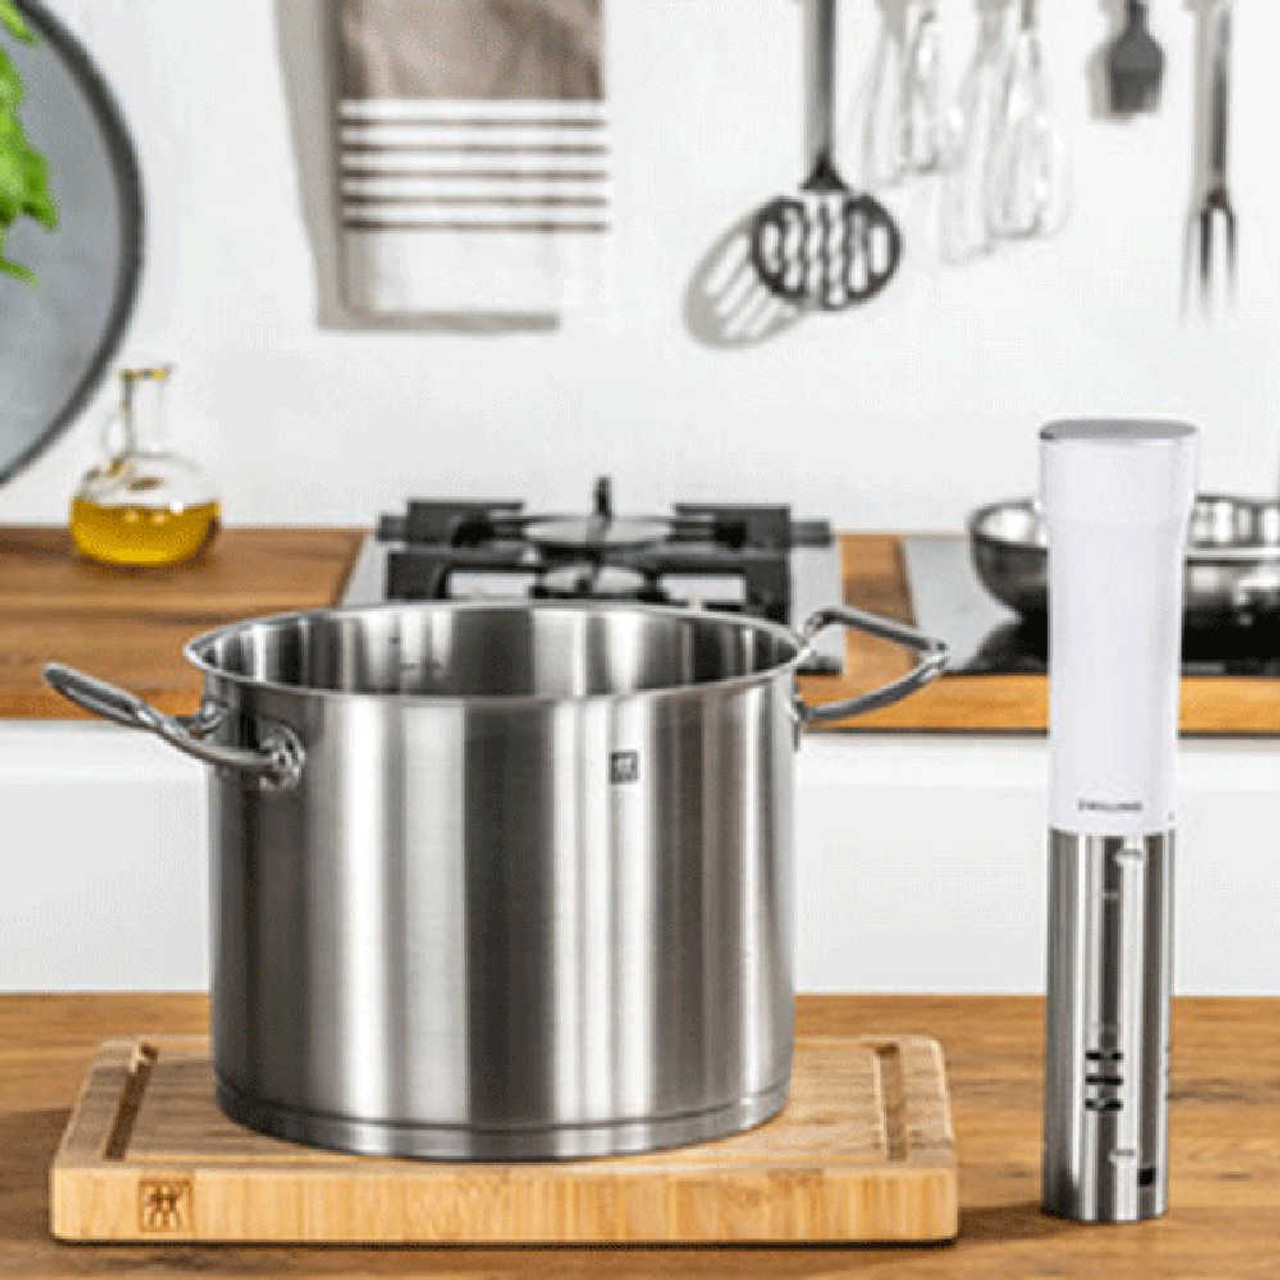 https://cdn11.bigcommerce.com/s-hccytny0od/images/stencil/1280x1280/products/4370/17034/Zwilling_Enfinigy_Sous_Vide_Stick_7__19403.1635376186.jpg?c=2?imbypass=on